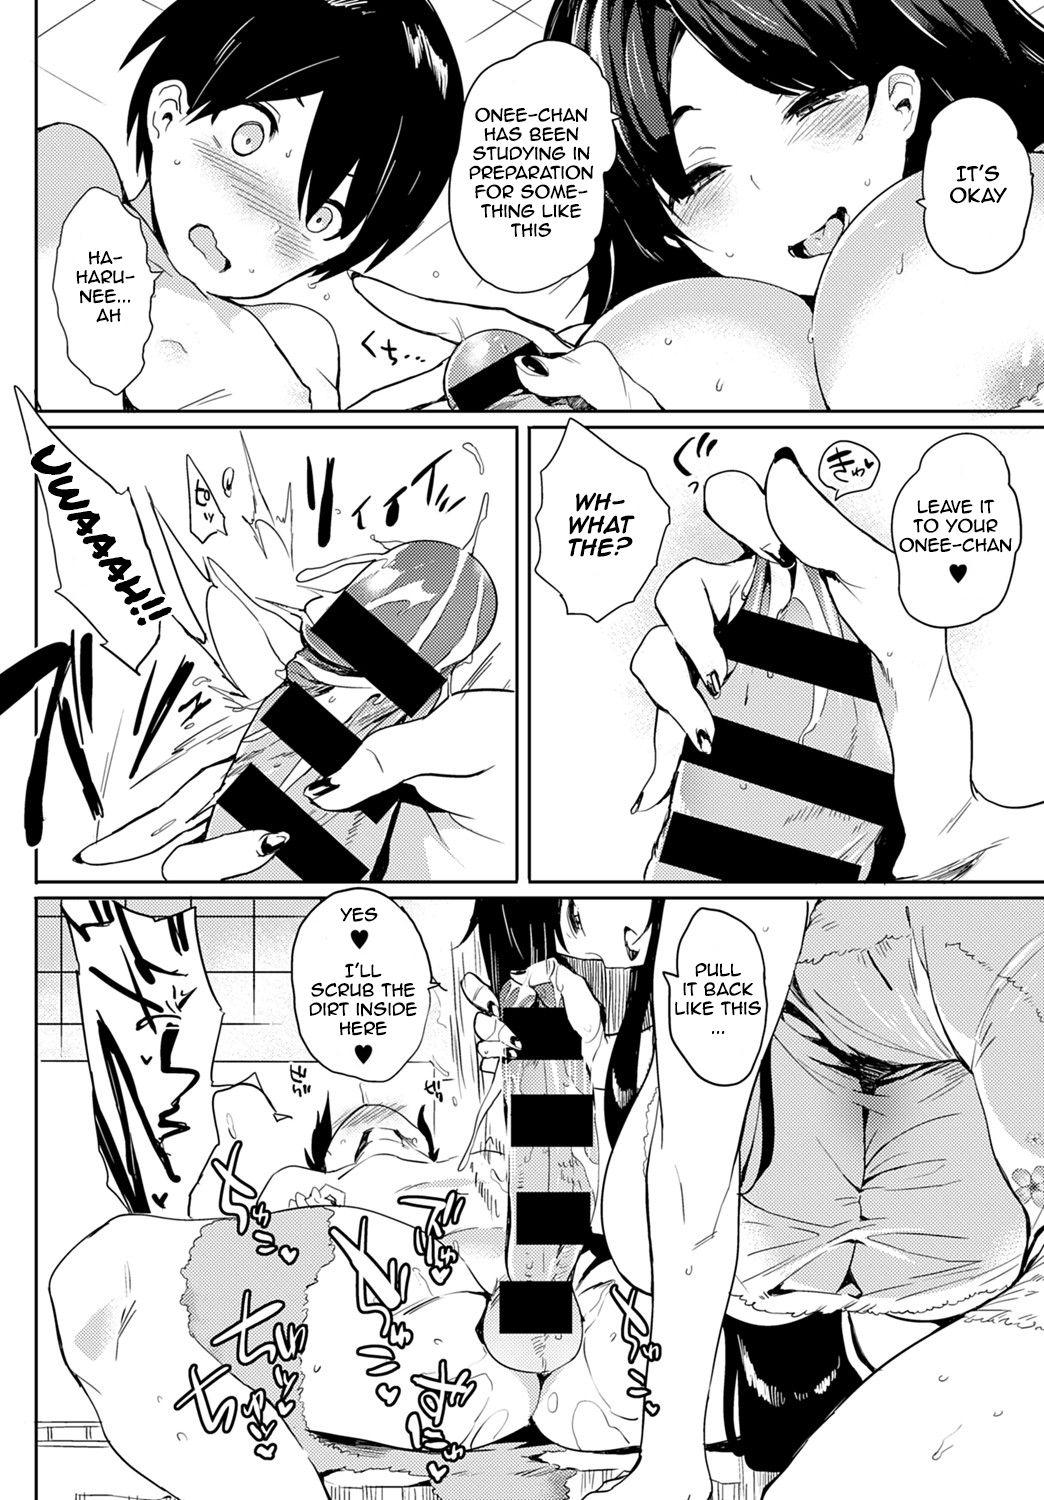 Shemales Kyoushuu! Criminal Onee-chan | Rude! Ungrateful Older Sister Free 18 Year Old Porn - Page 6